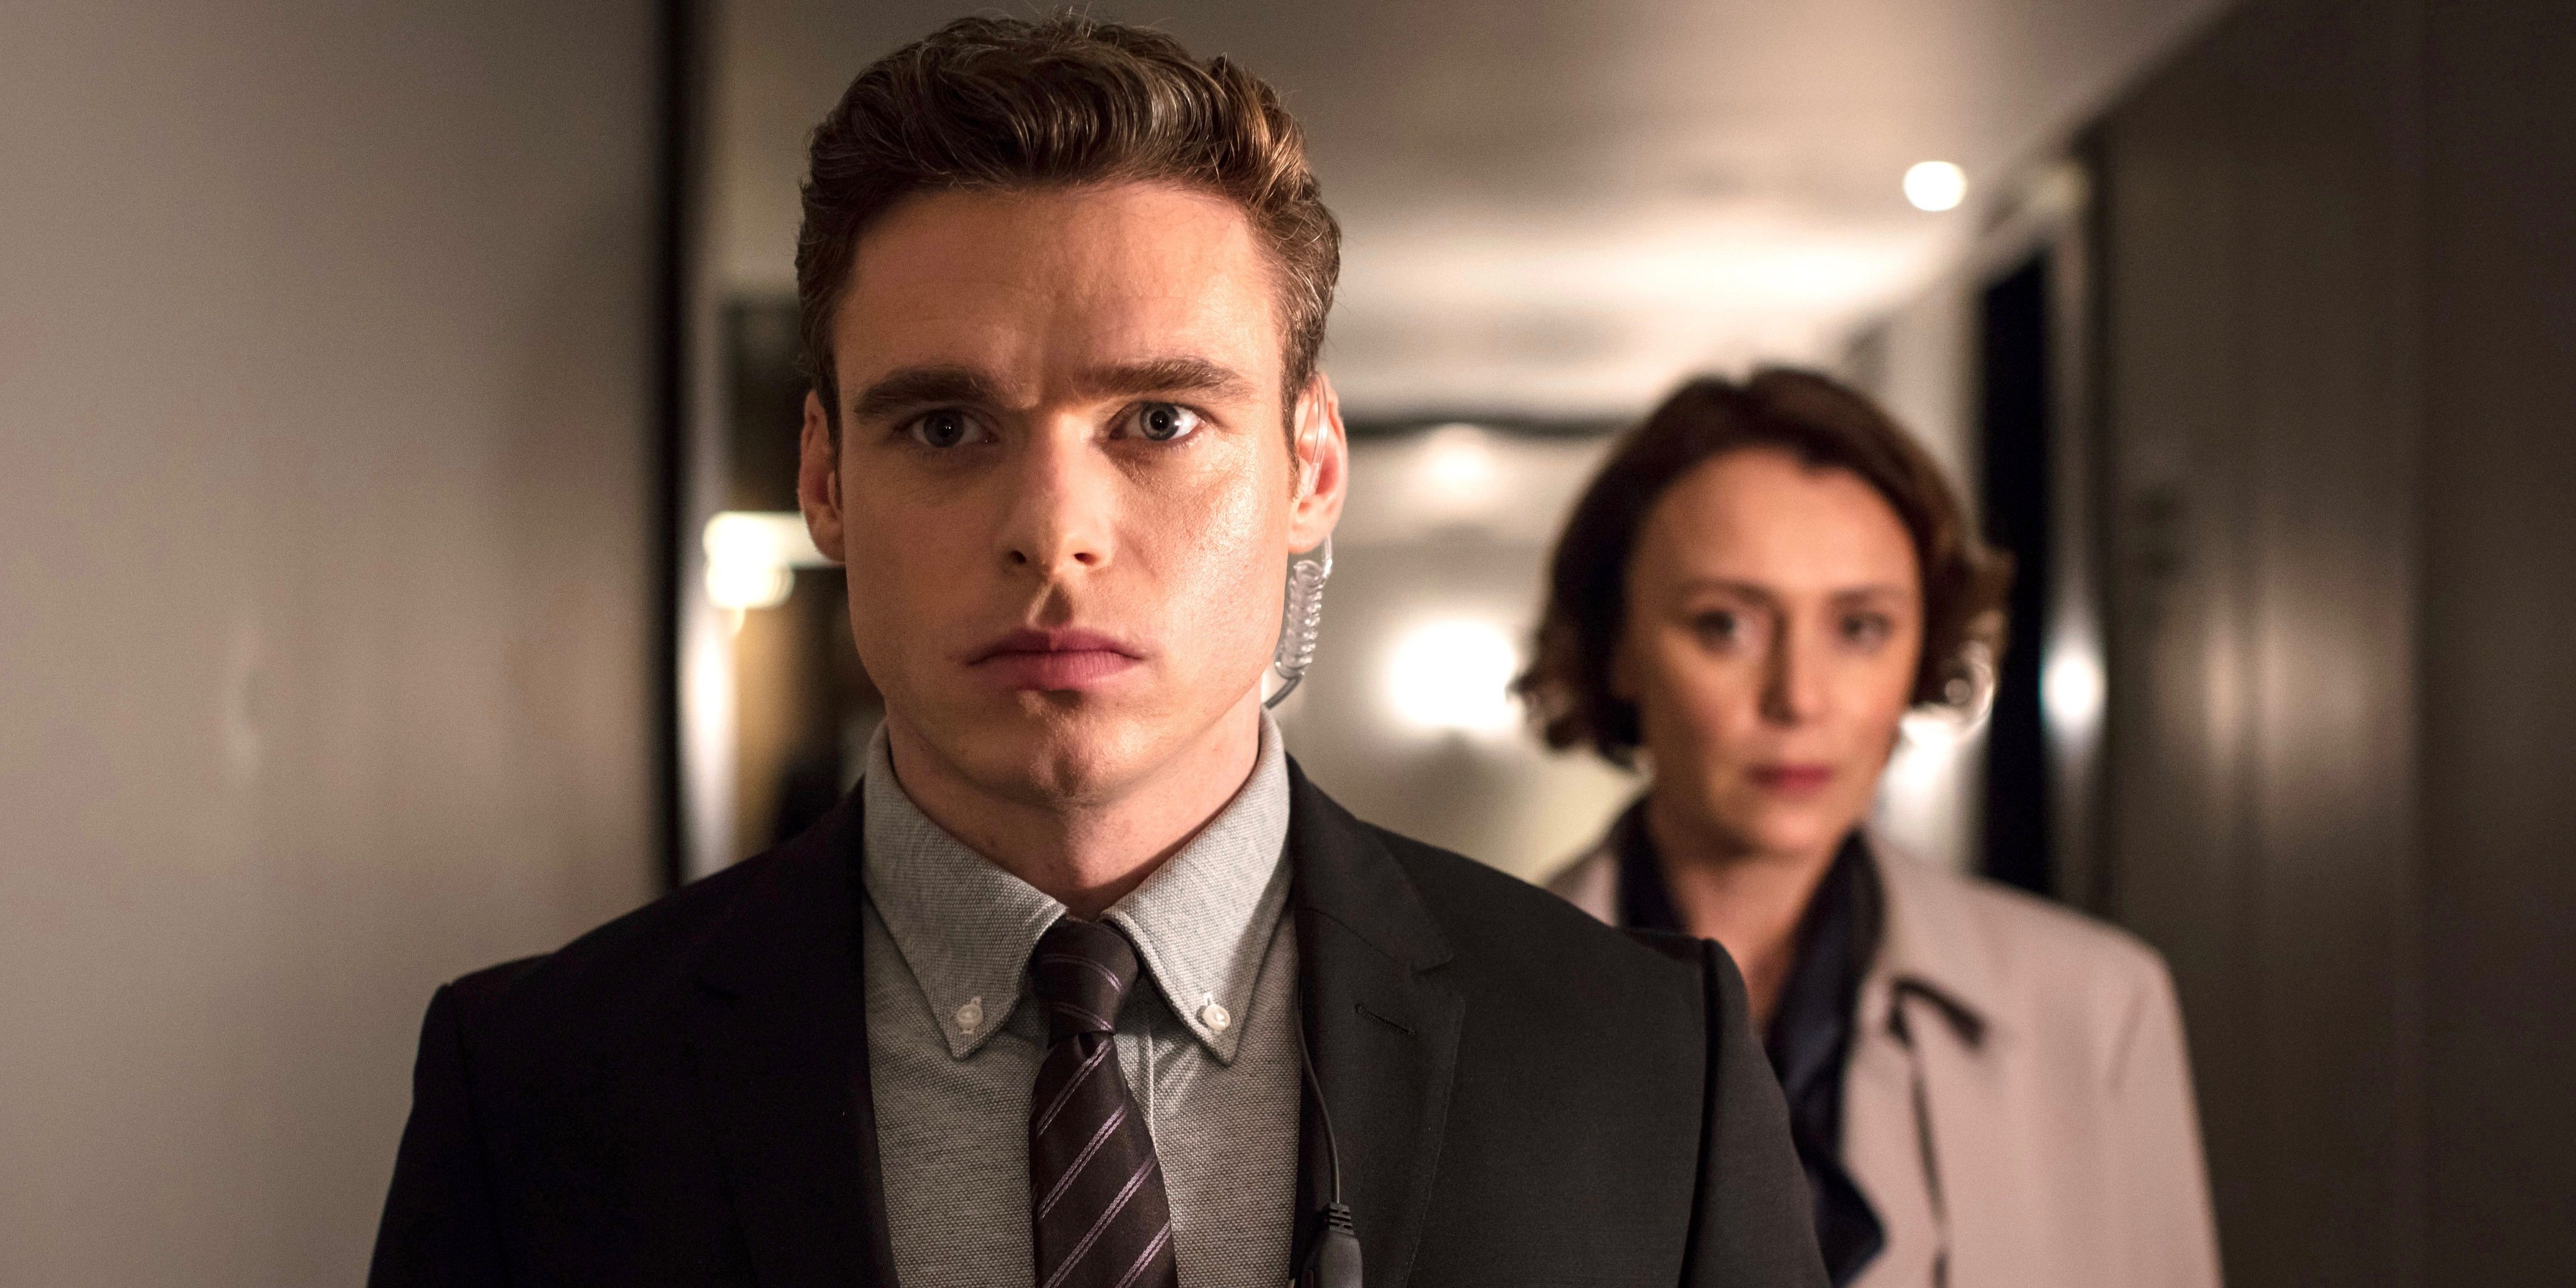 Richard Madden in Bodyguard with steely expression wearing earpiece with Keeley Hawes in background